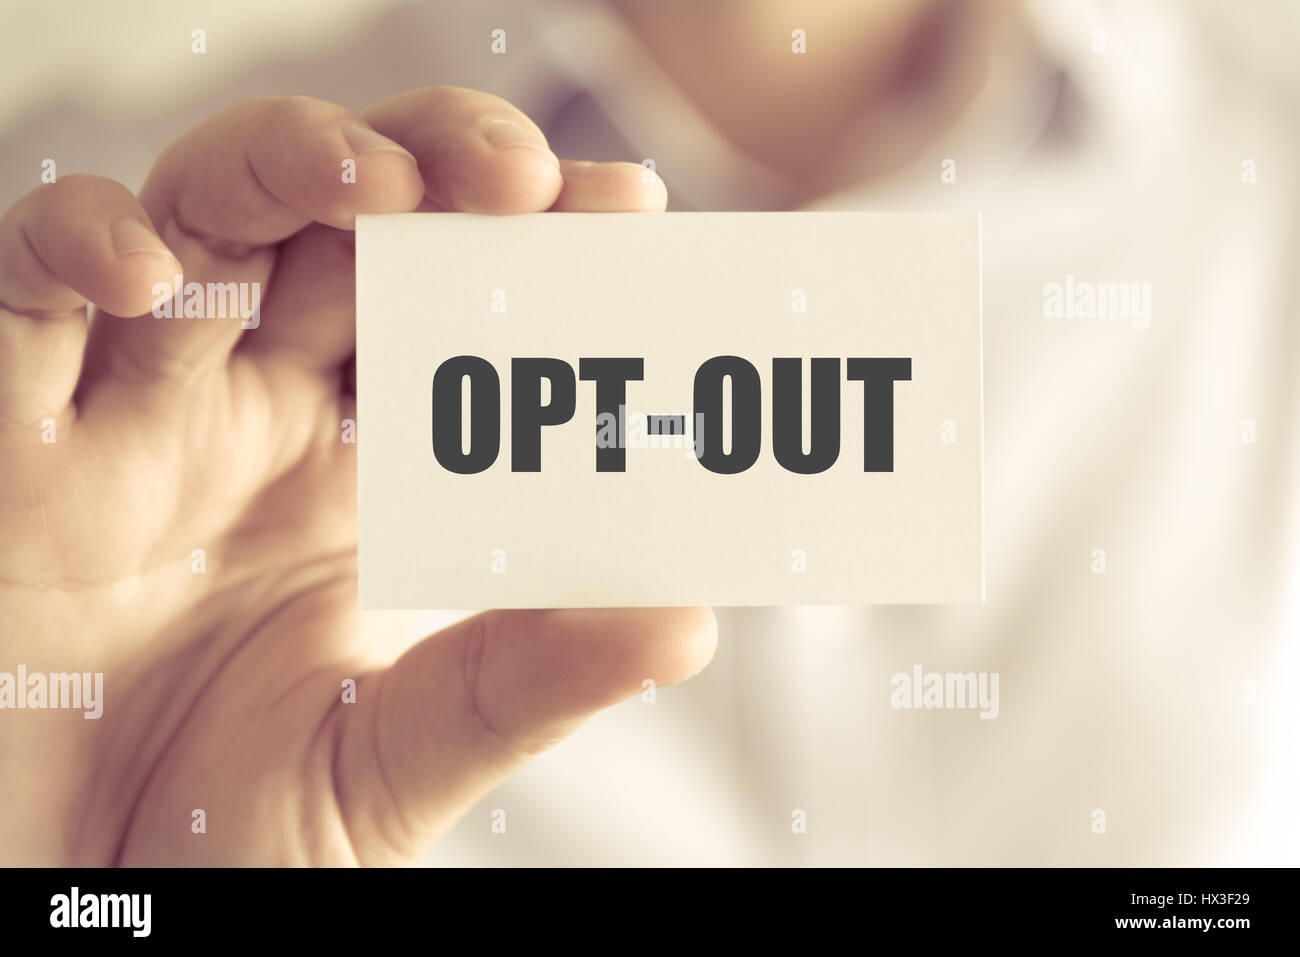 Closeup on businessman holding a card with text OPT-OUT, business concept image with soft focus background and vintage tone Stock Photo